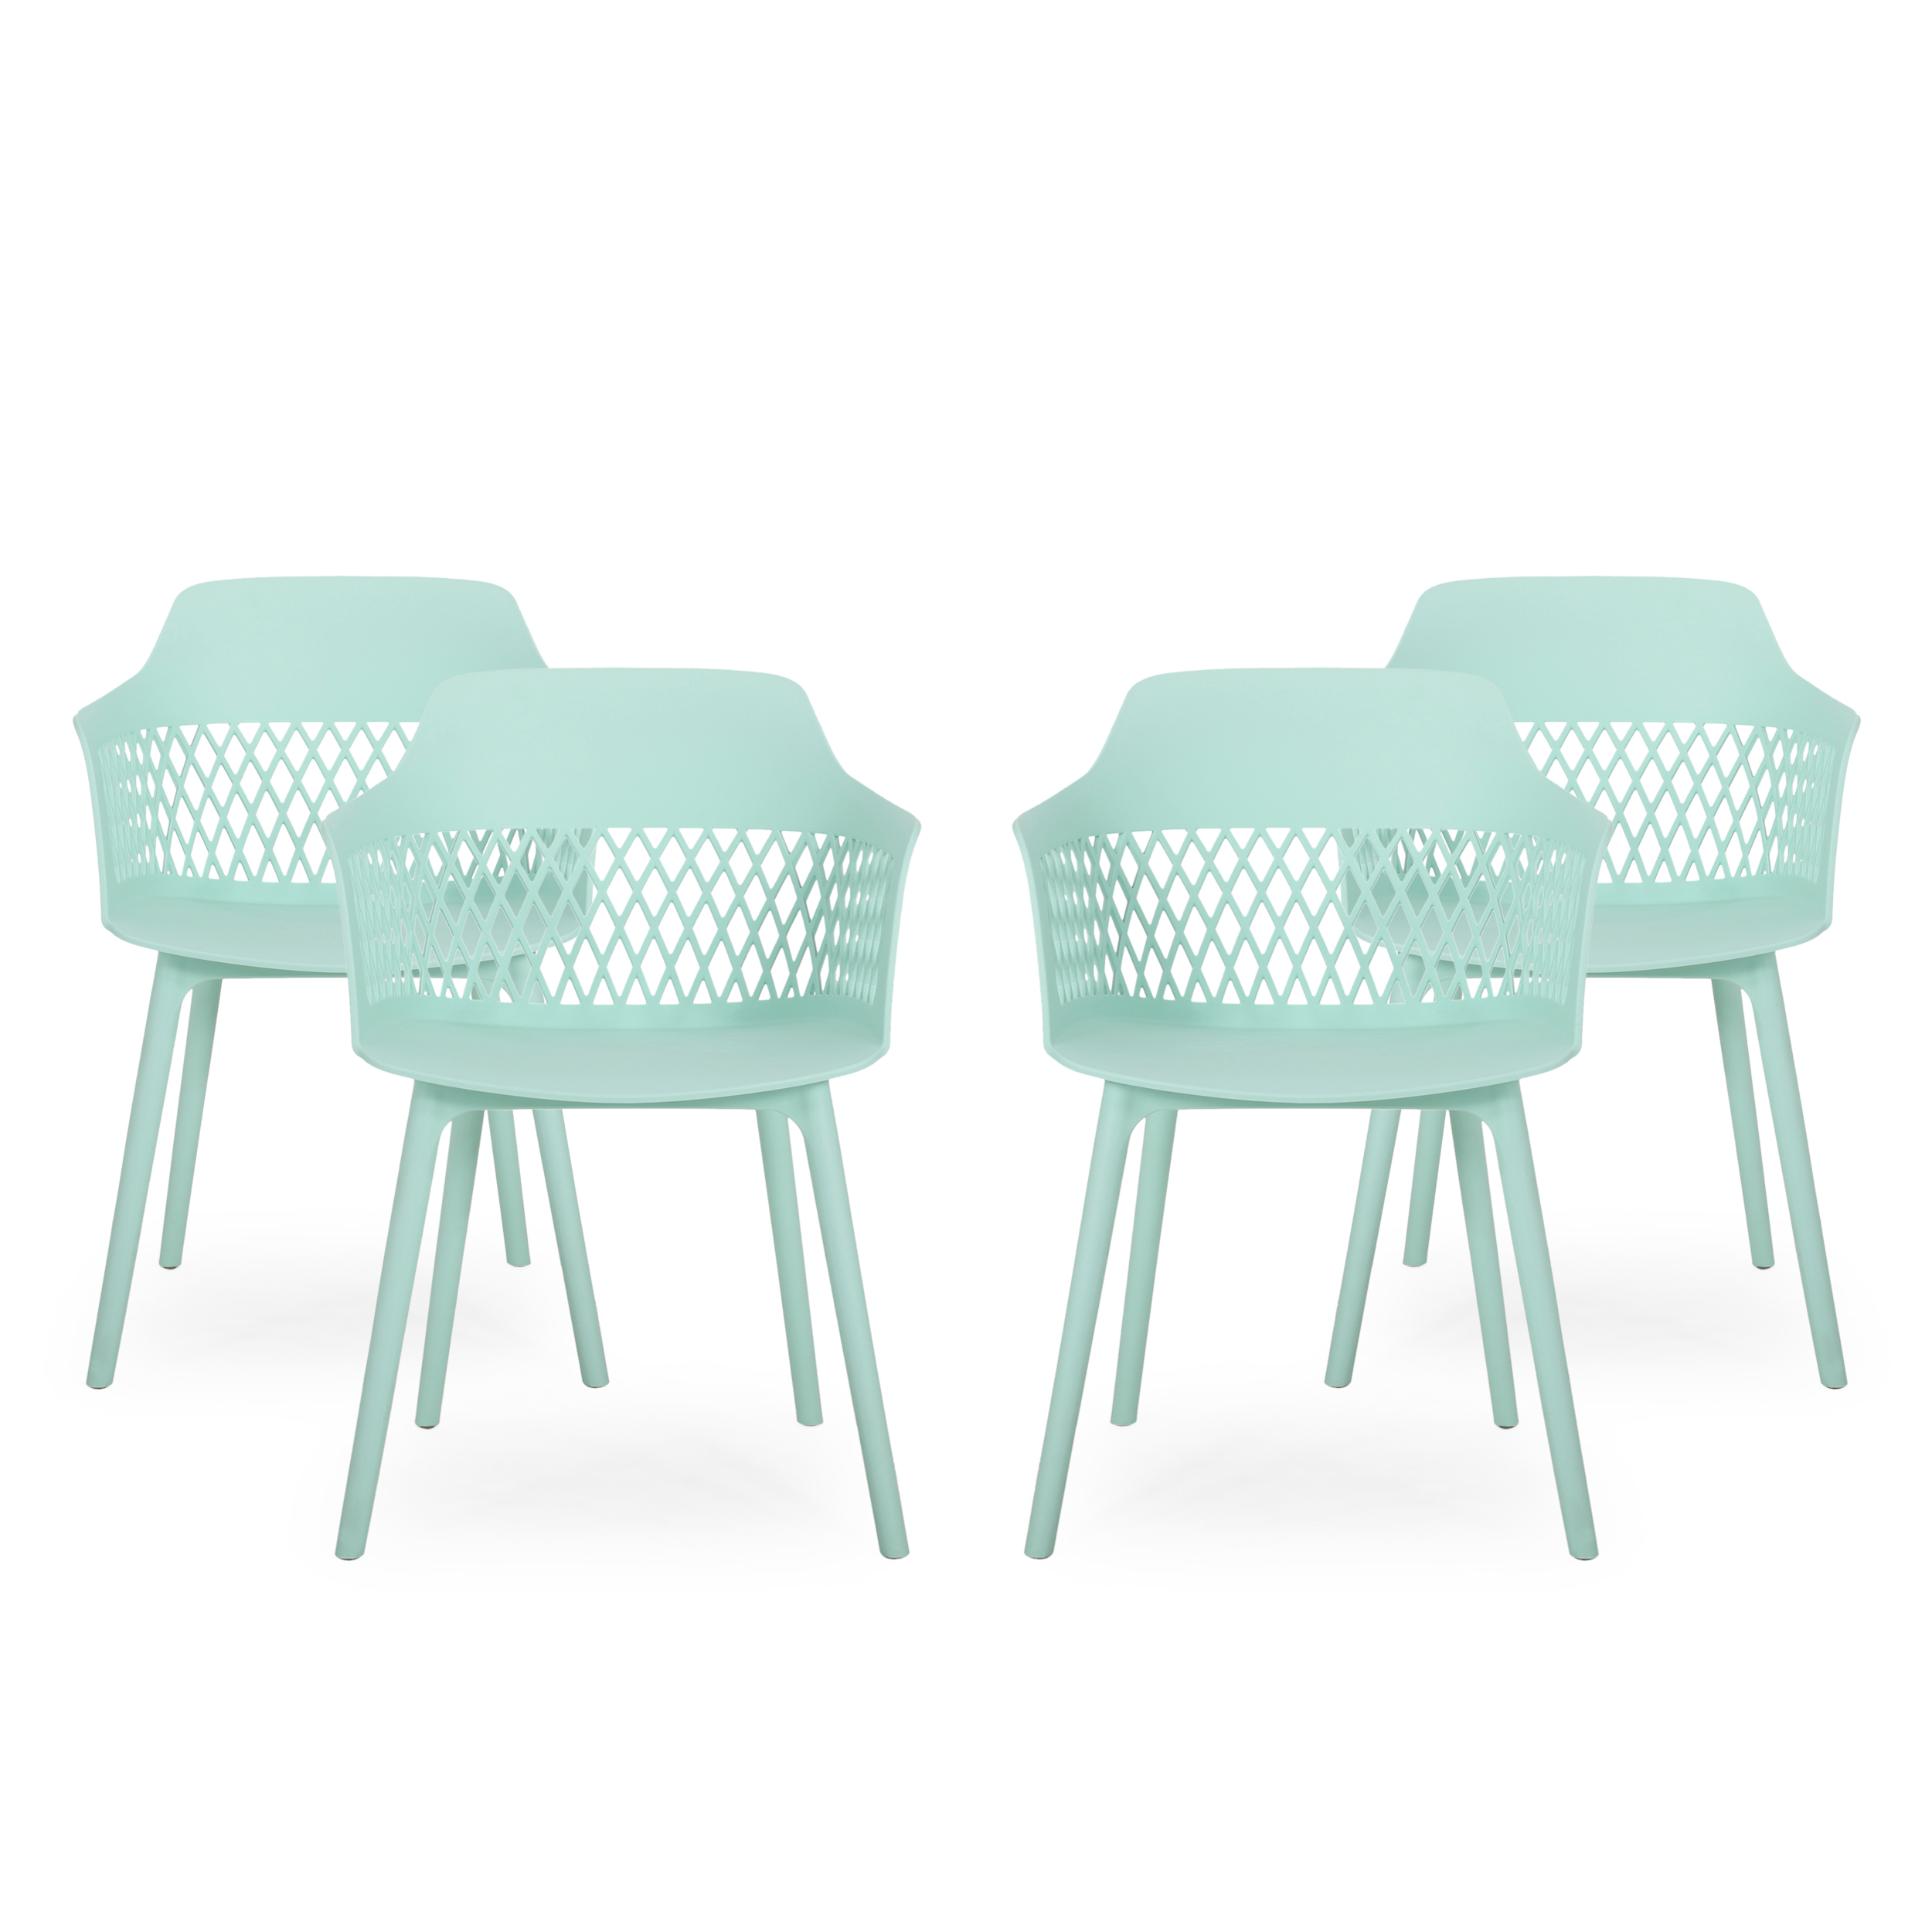 GDF Studio Airyanna Outdoor Modern Dining Chair, Set of 4, Mint - image 1 of 7